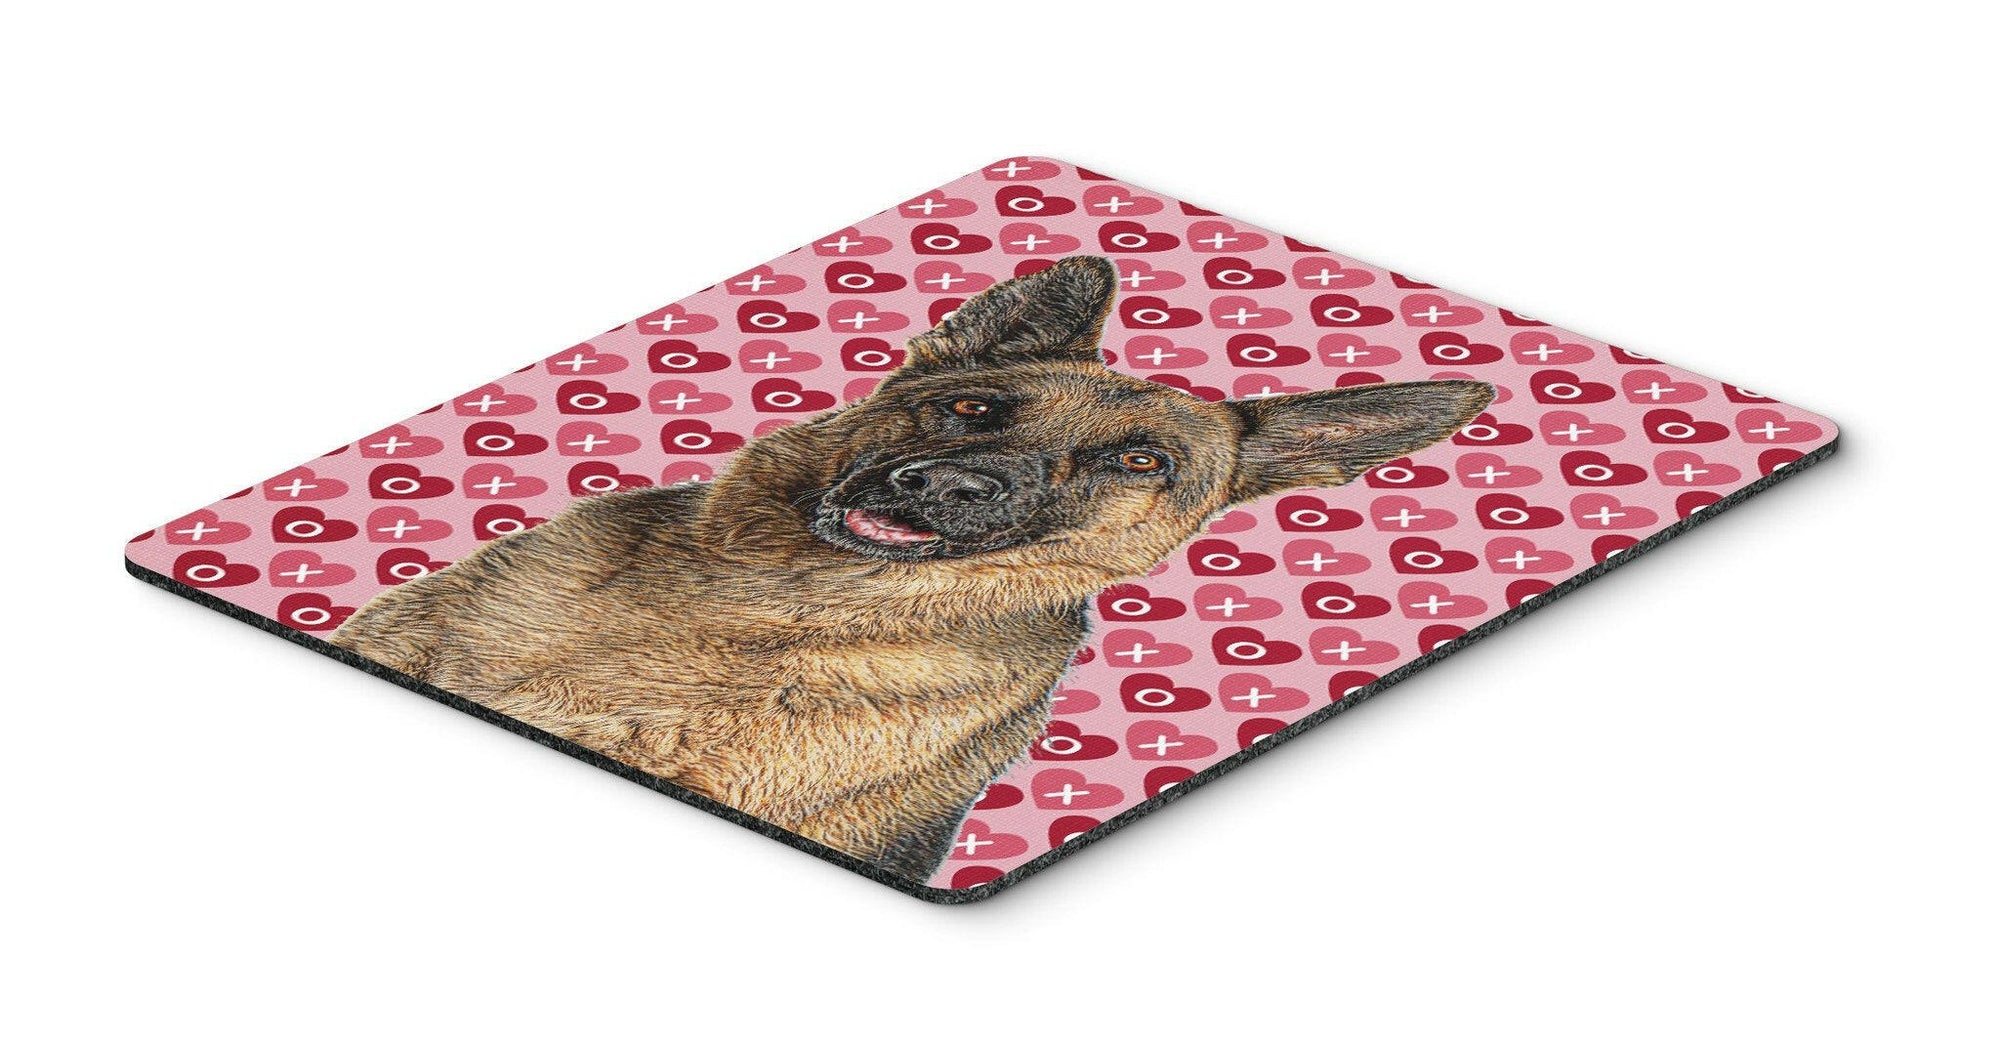 Hearts Love and Valentine's Day German Shepherd Mouse Pad, Hot Pad or Trivet KJ1194MP by Caroline's Treasures